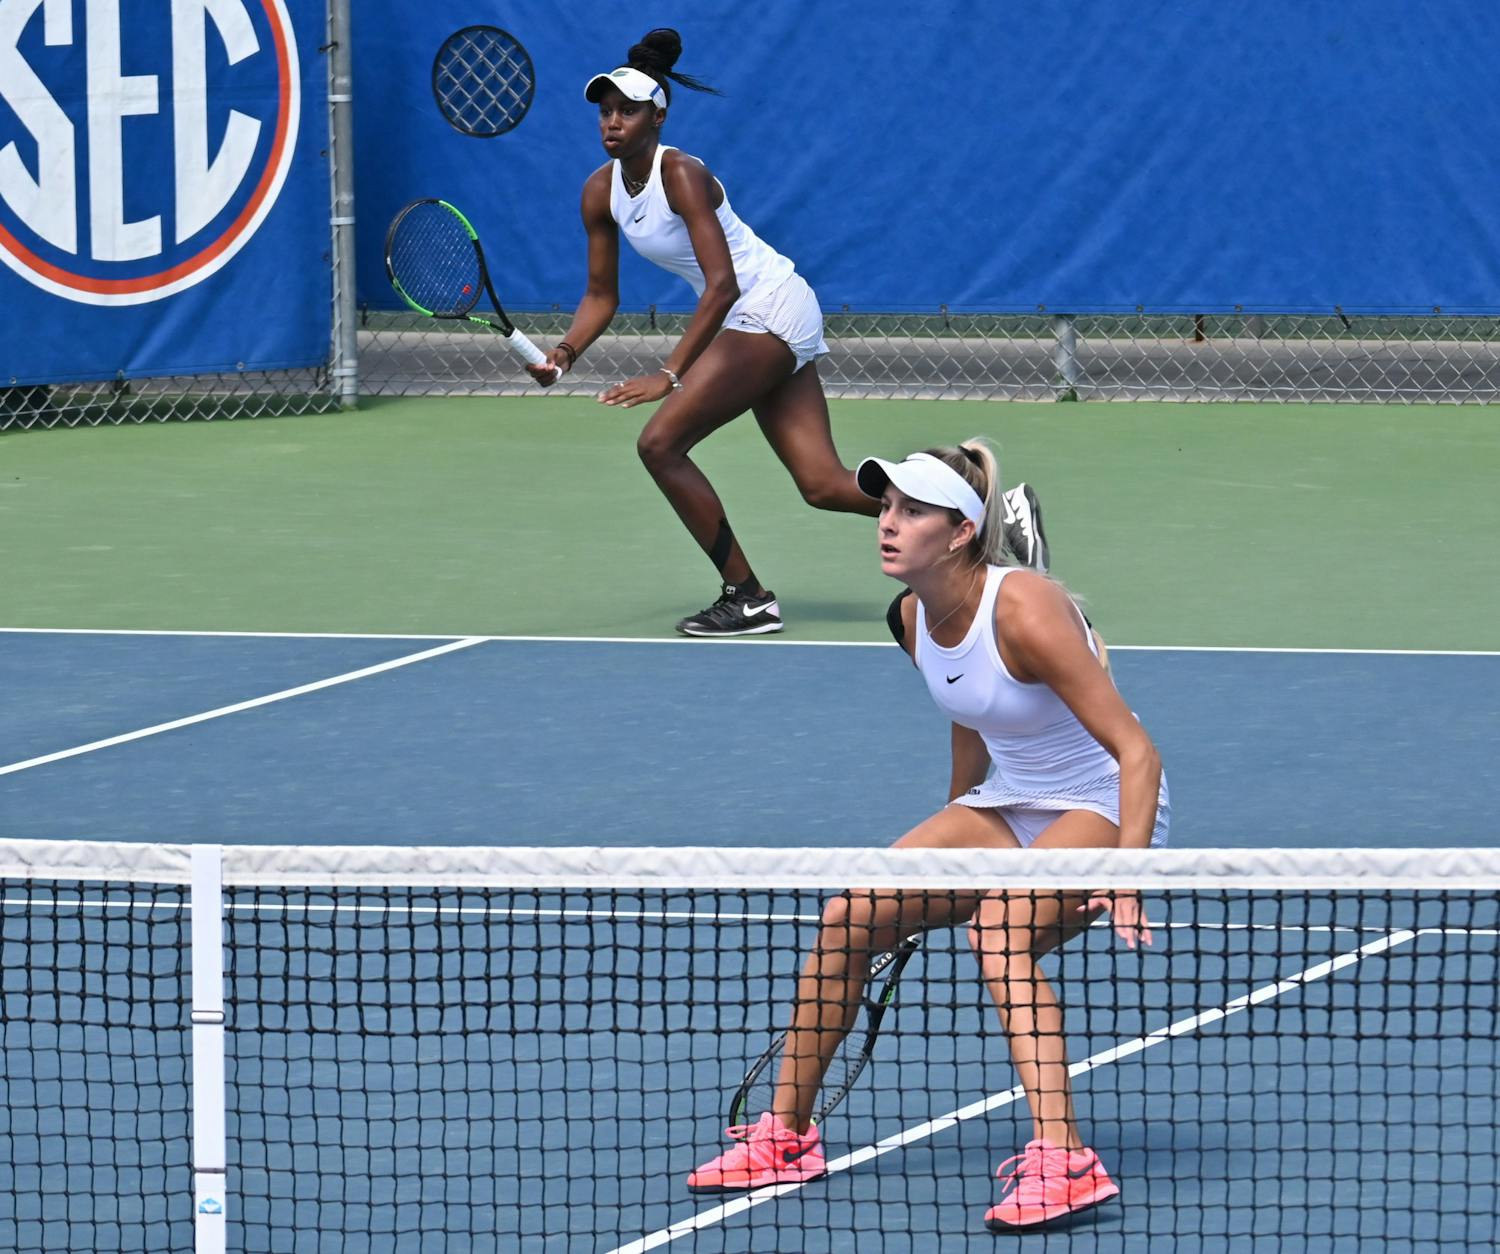 Junior Marlee Zein and senior McCartney Kessler against Arkansas on March 14, 2021. The Gators overcame the Mississippi State Bulldogs Sunday afternoon.